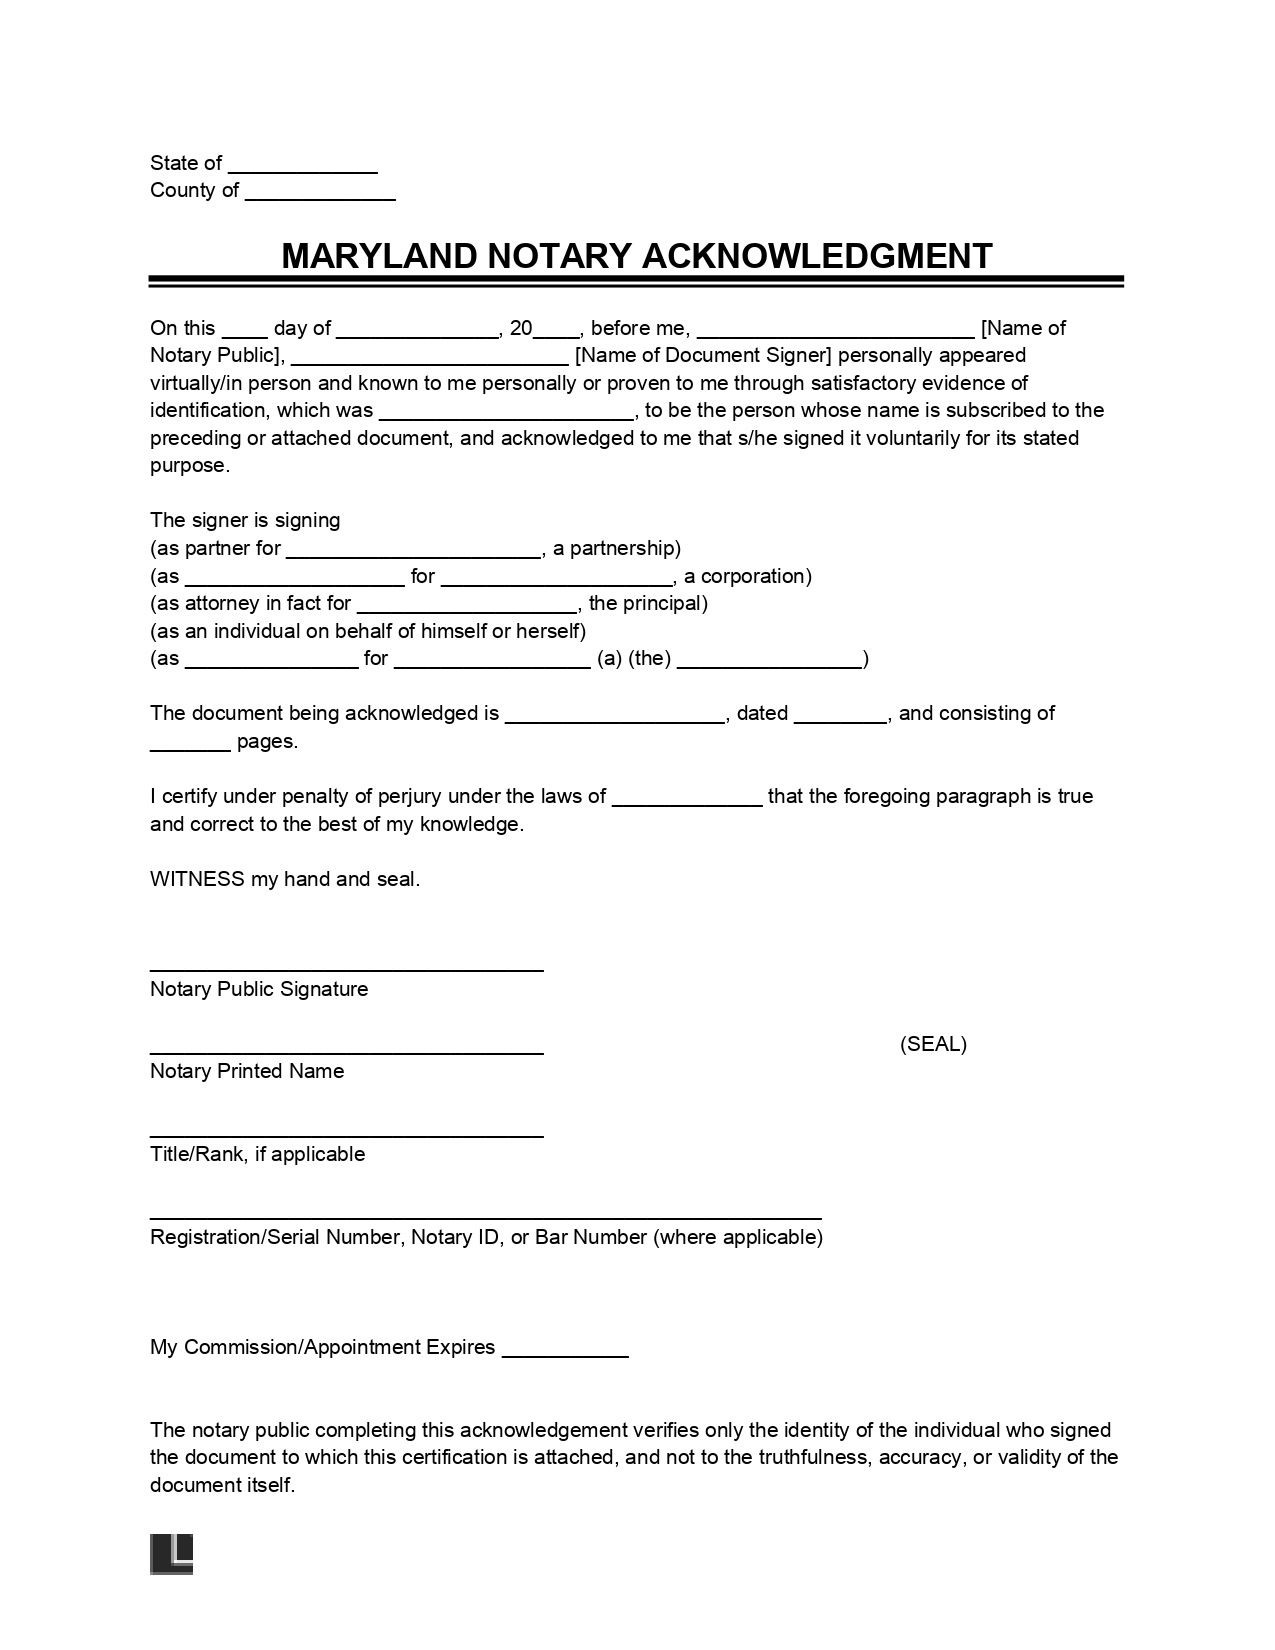 Maryland Notary Acknowledgment Form